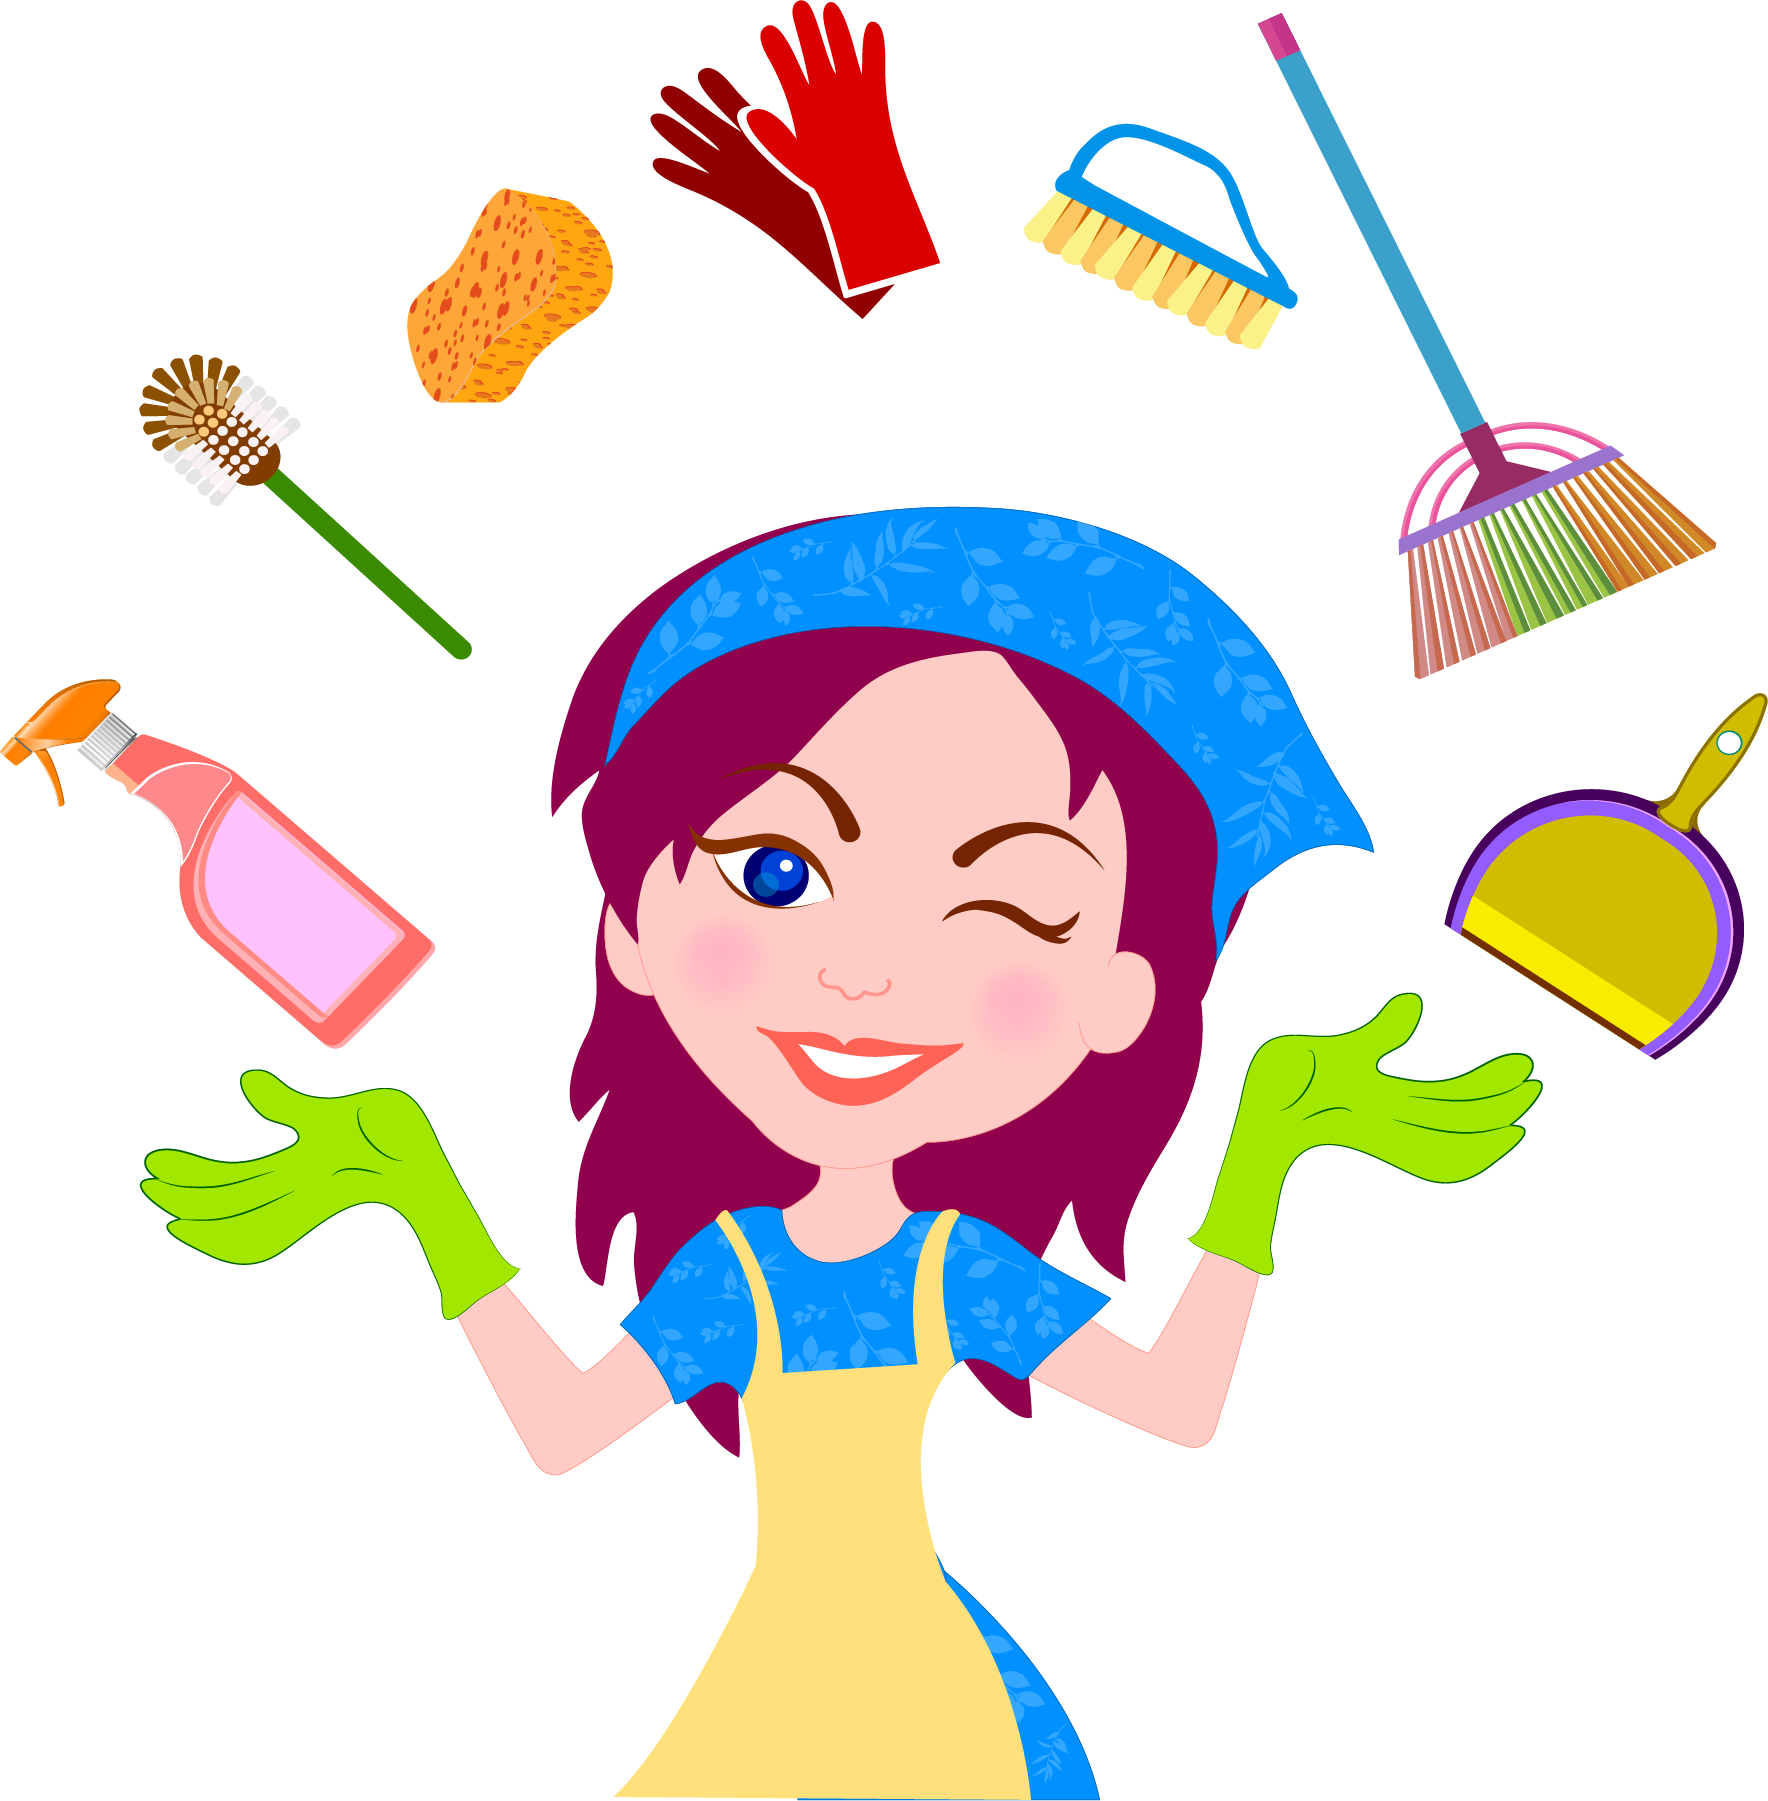 Cleaner Maid Service Cleaning Housekeeping - Cleaner Maid Service Cleaning Housekeeping (1768x1801)